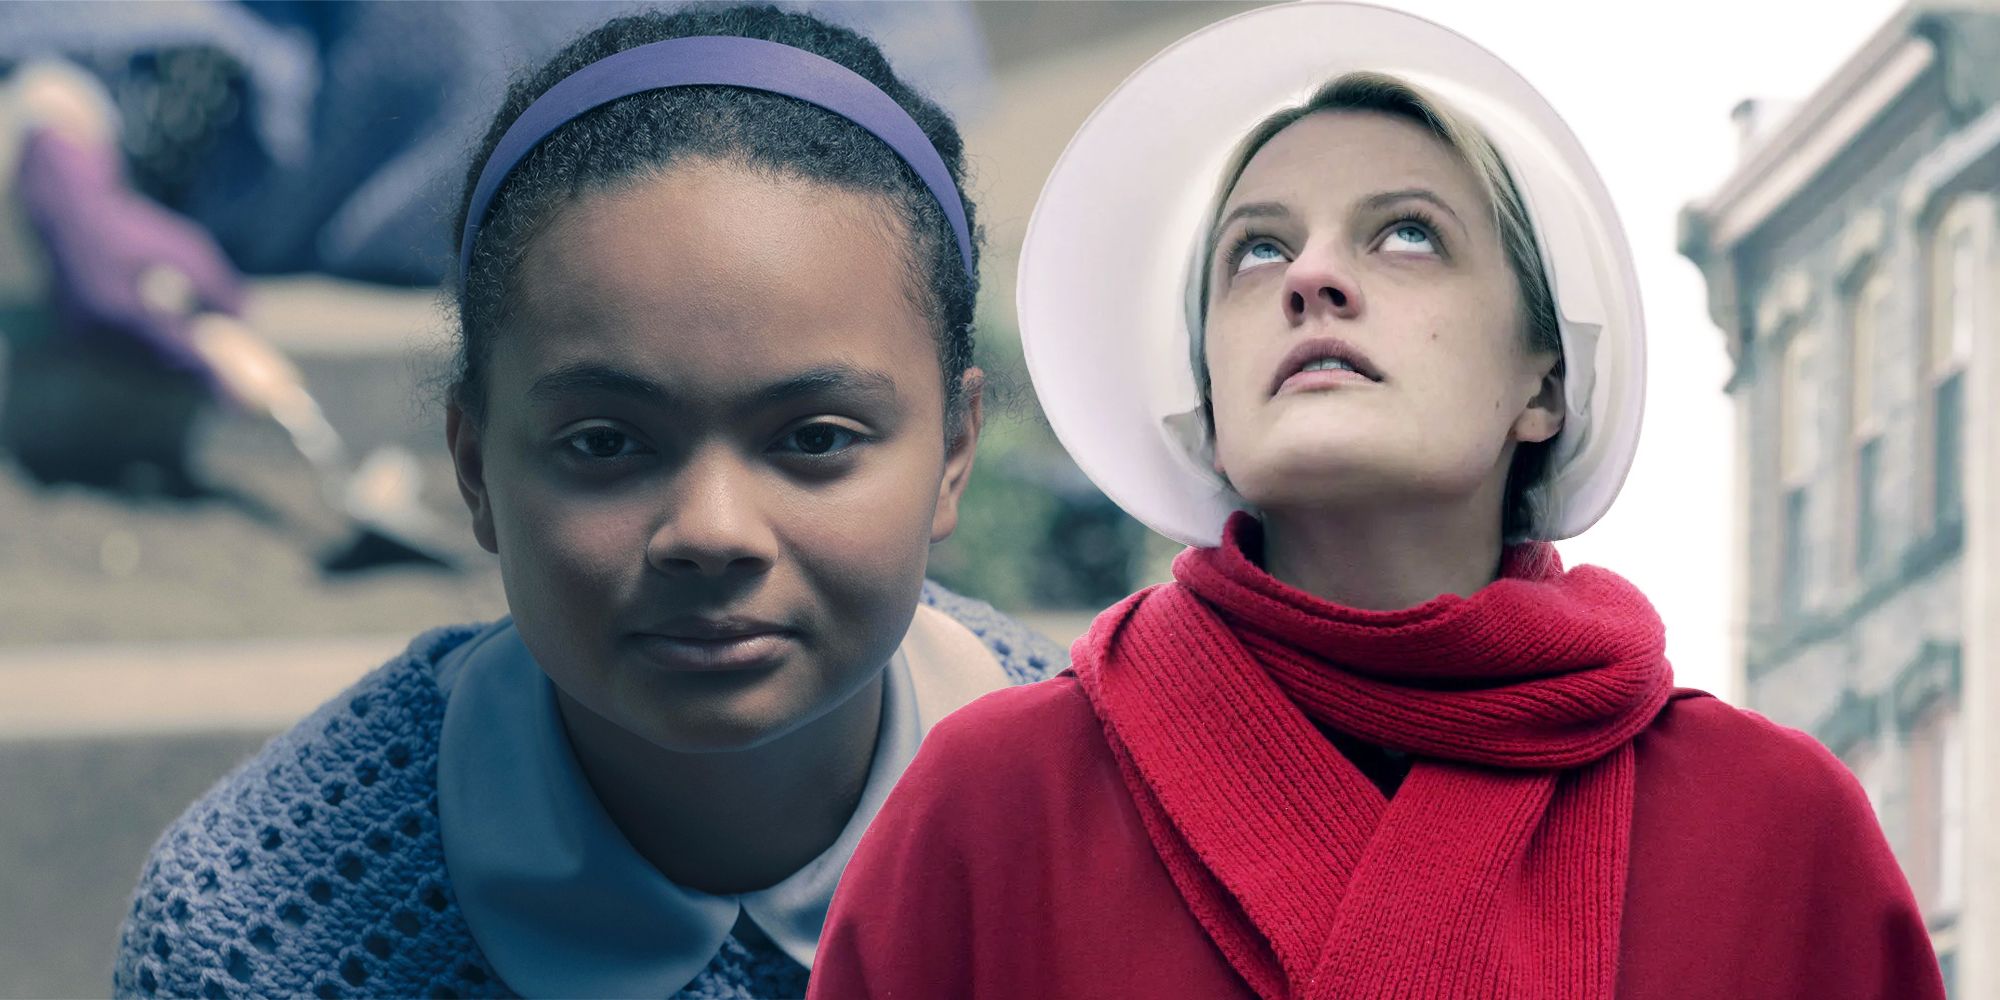 June and Hannah in The Handmaid's Tale